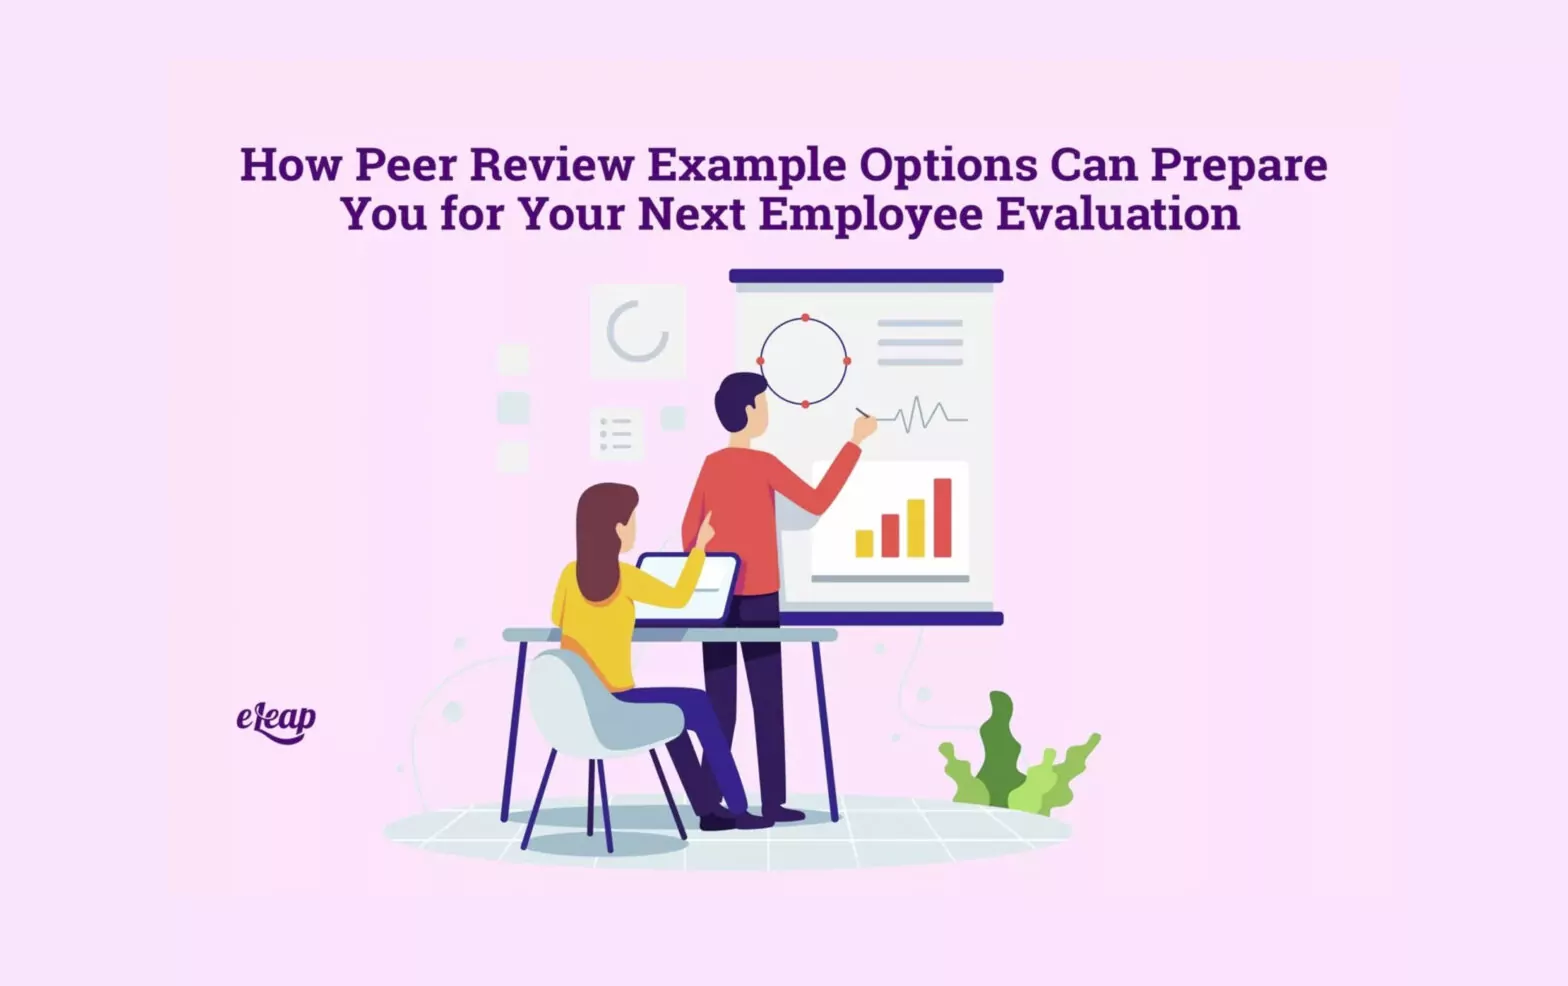 How Peer Review Example Options Can Prepare You for Your Next Employee Evaluation